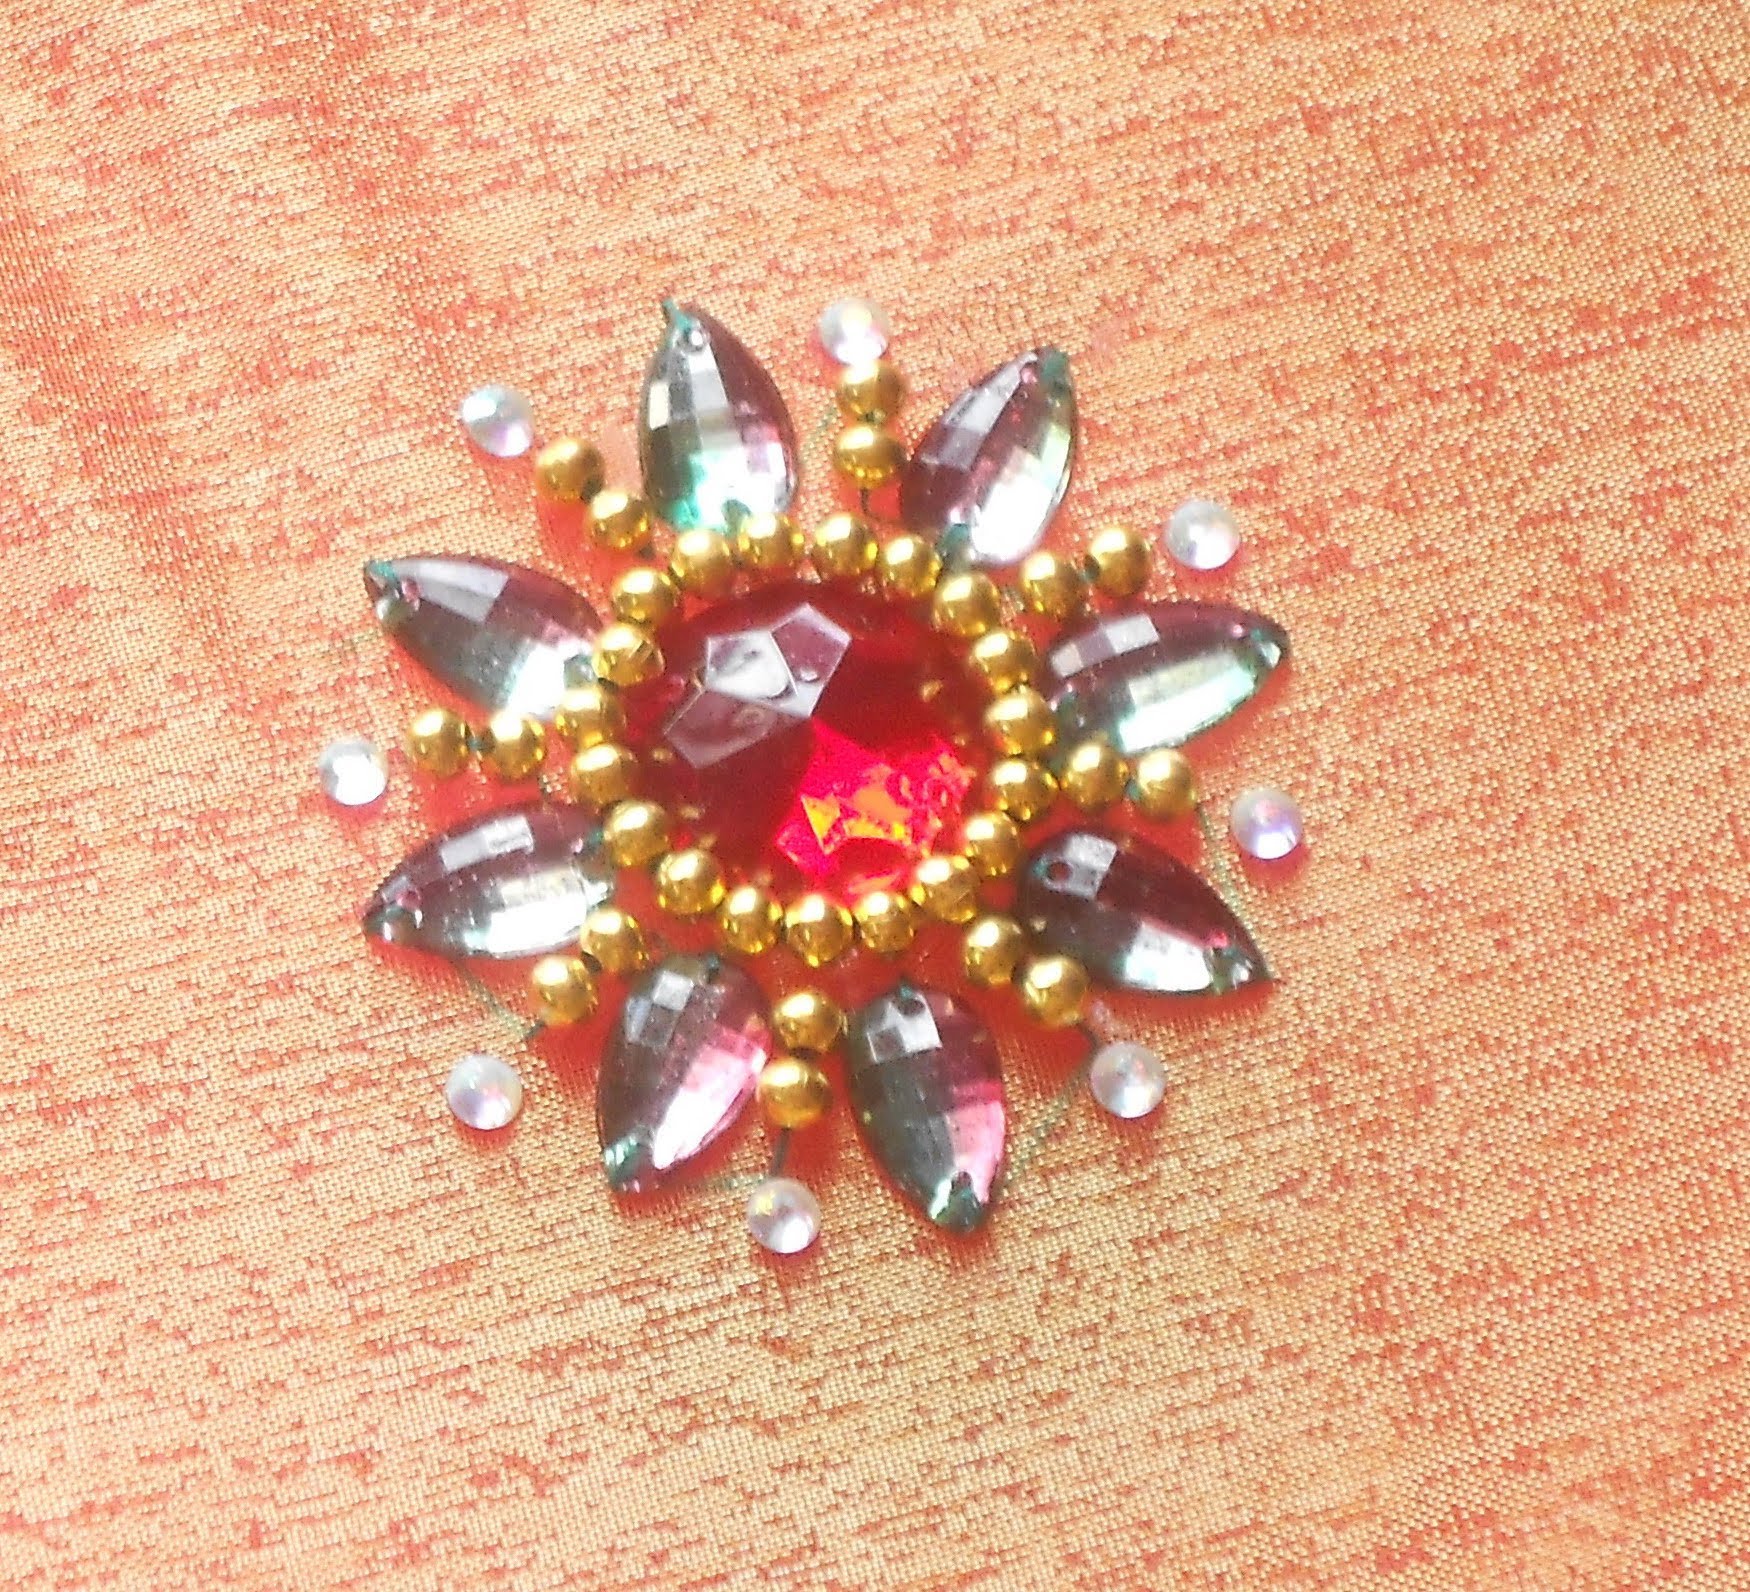 HAND EMBROIDERY: How to sew a Kundan stone with golden beads - YouTube